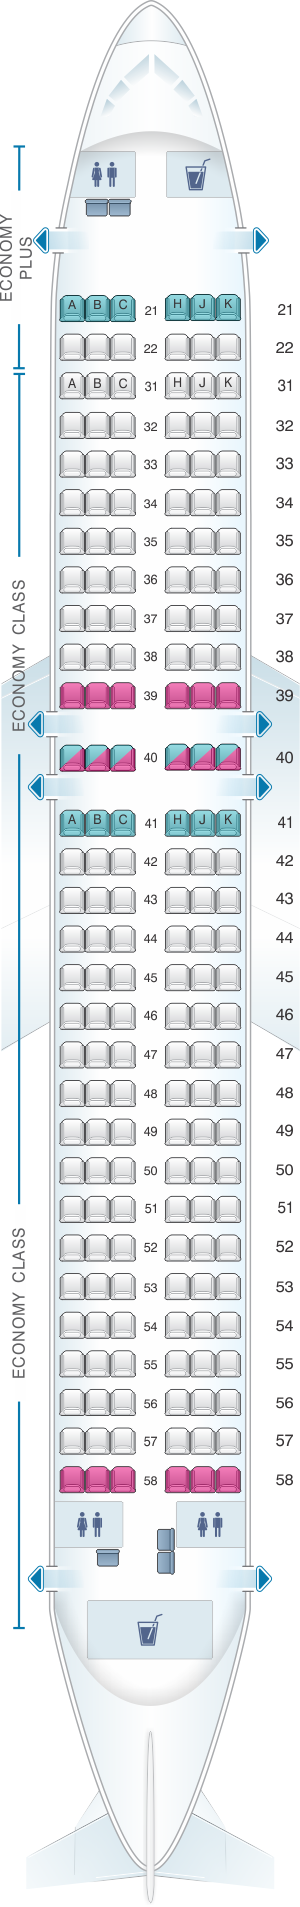 Seat map for Philippine Airlines Airbus A320 200 180PAX